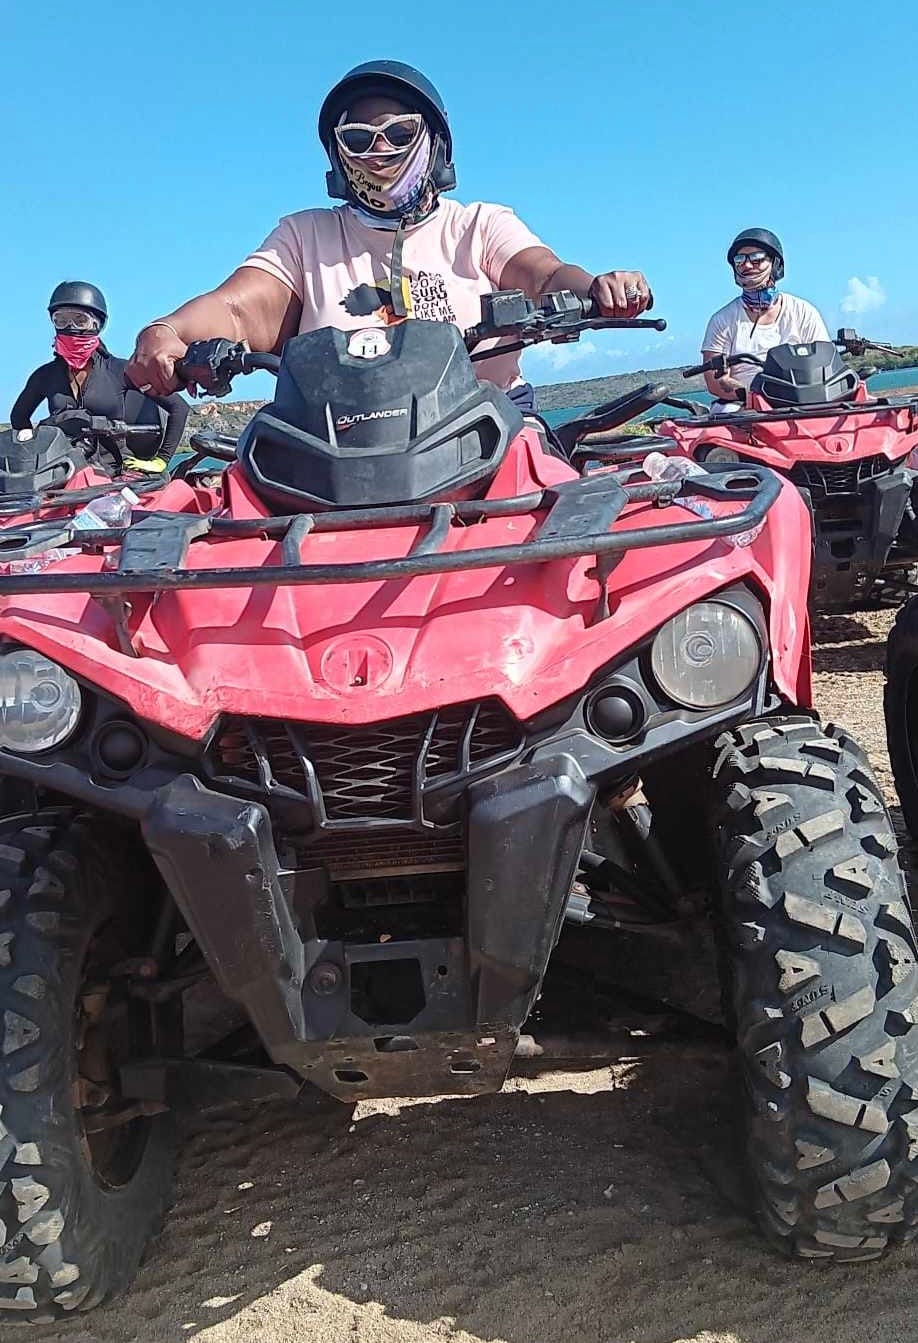 A black woman is sitting on the seat of a red ATV, wearing a black helmet and purple face covering.